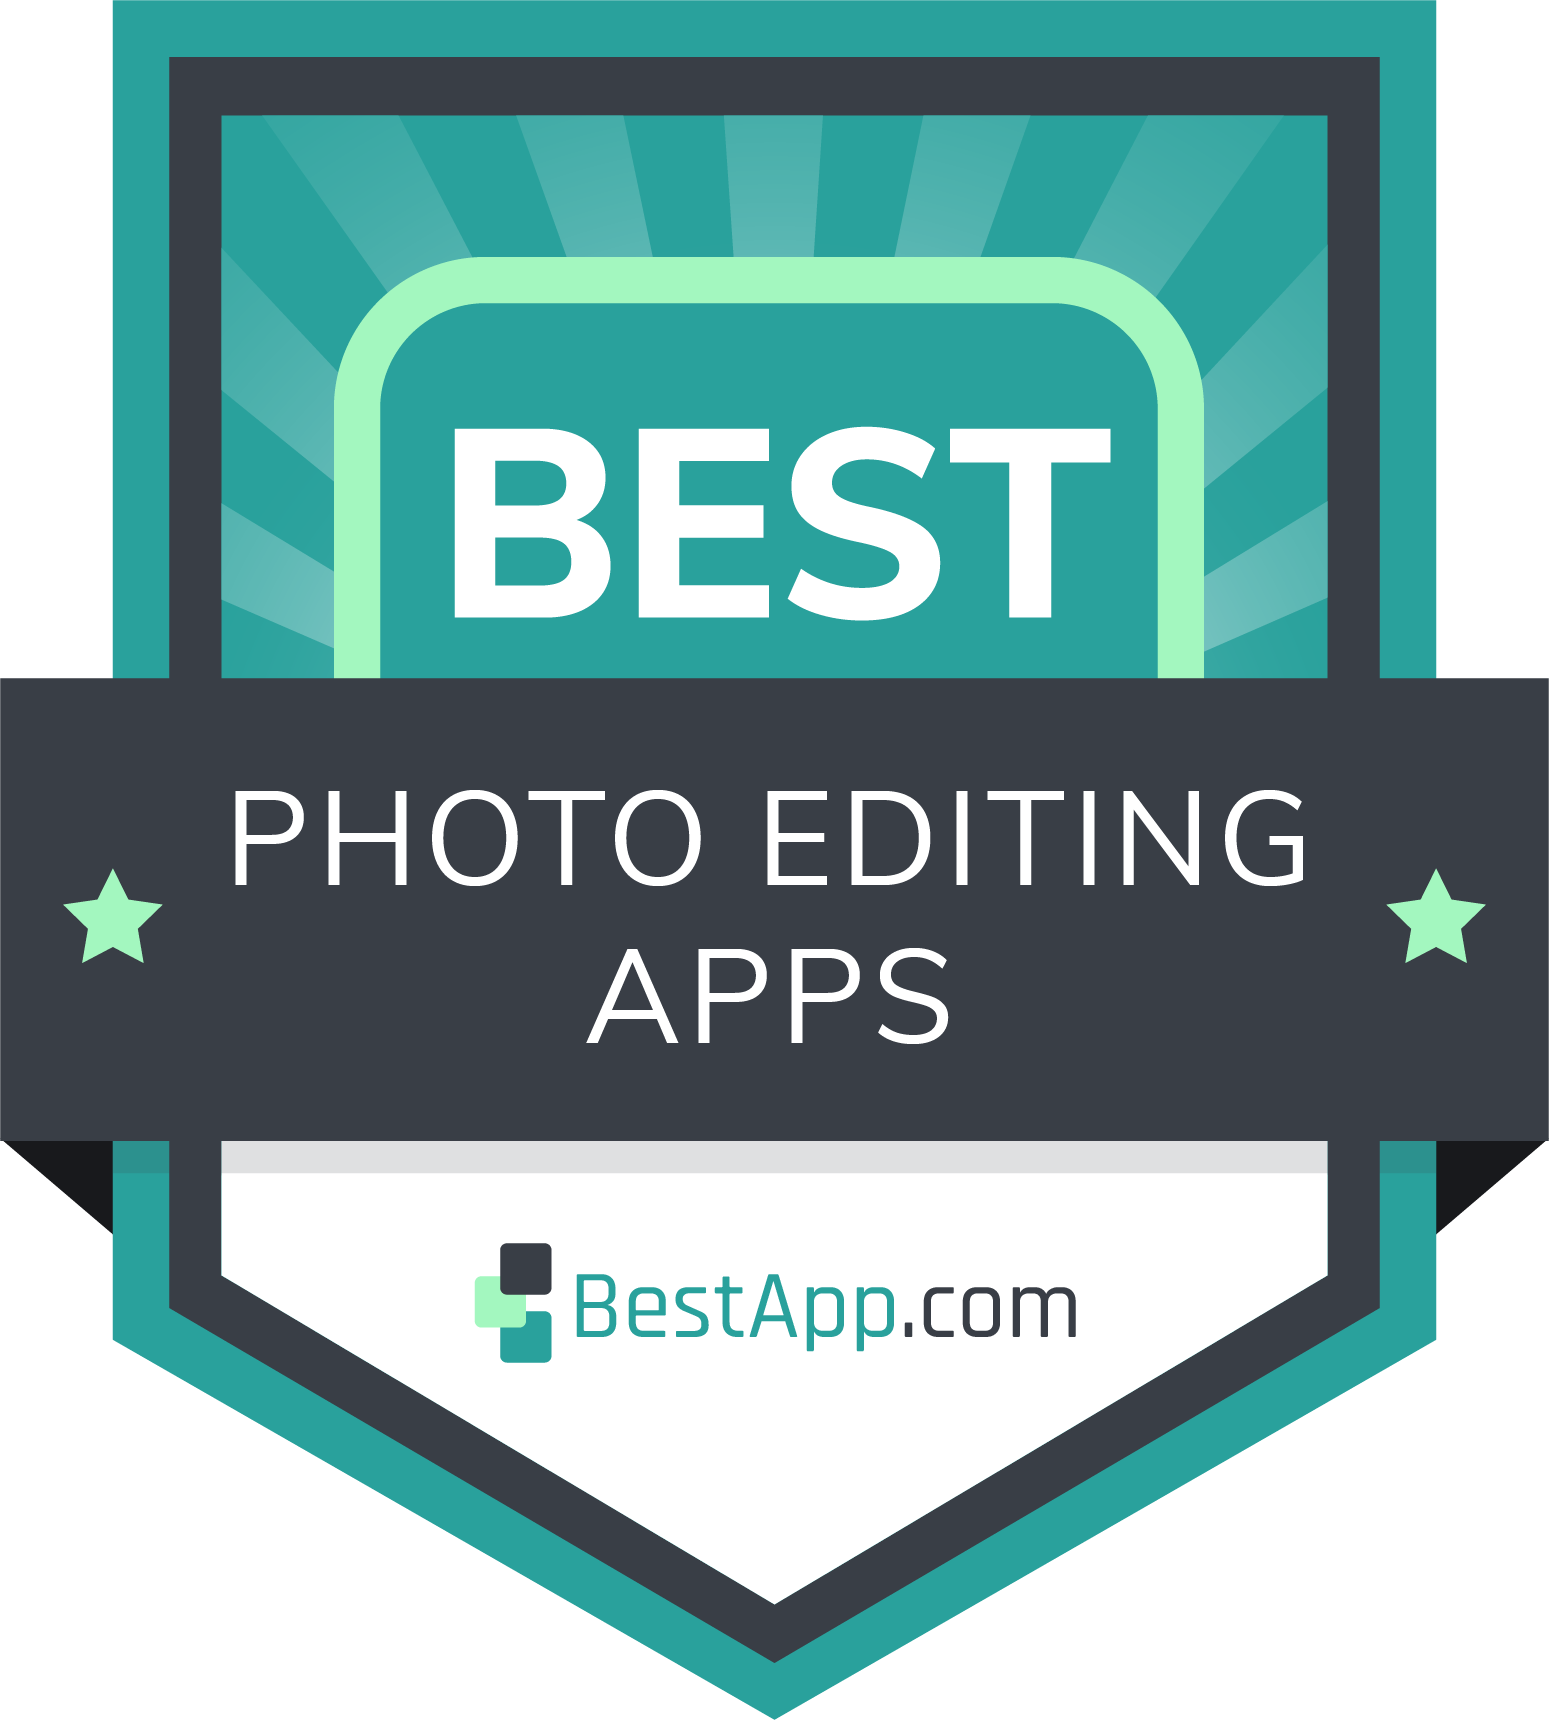 Best Photo Editing Apps Badge